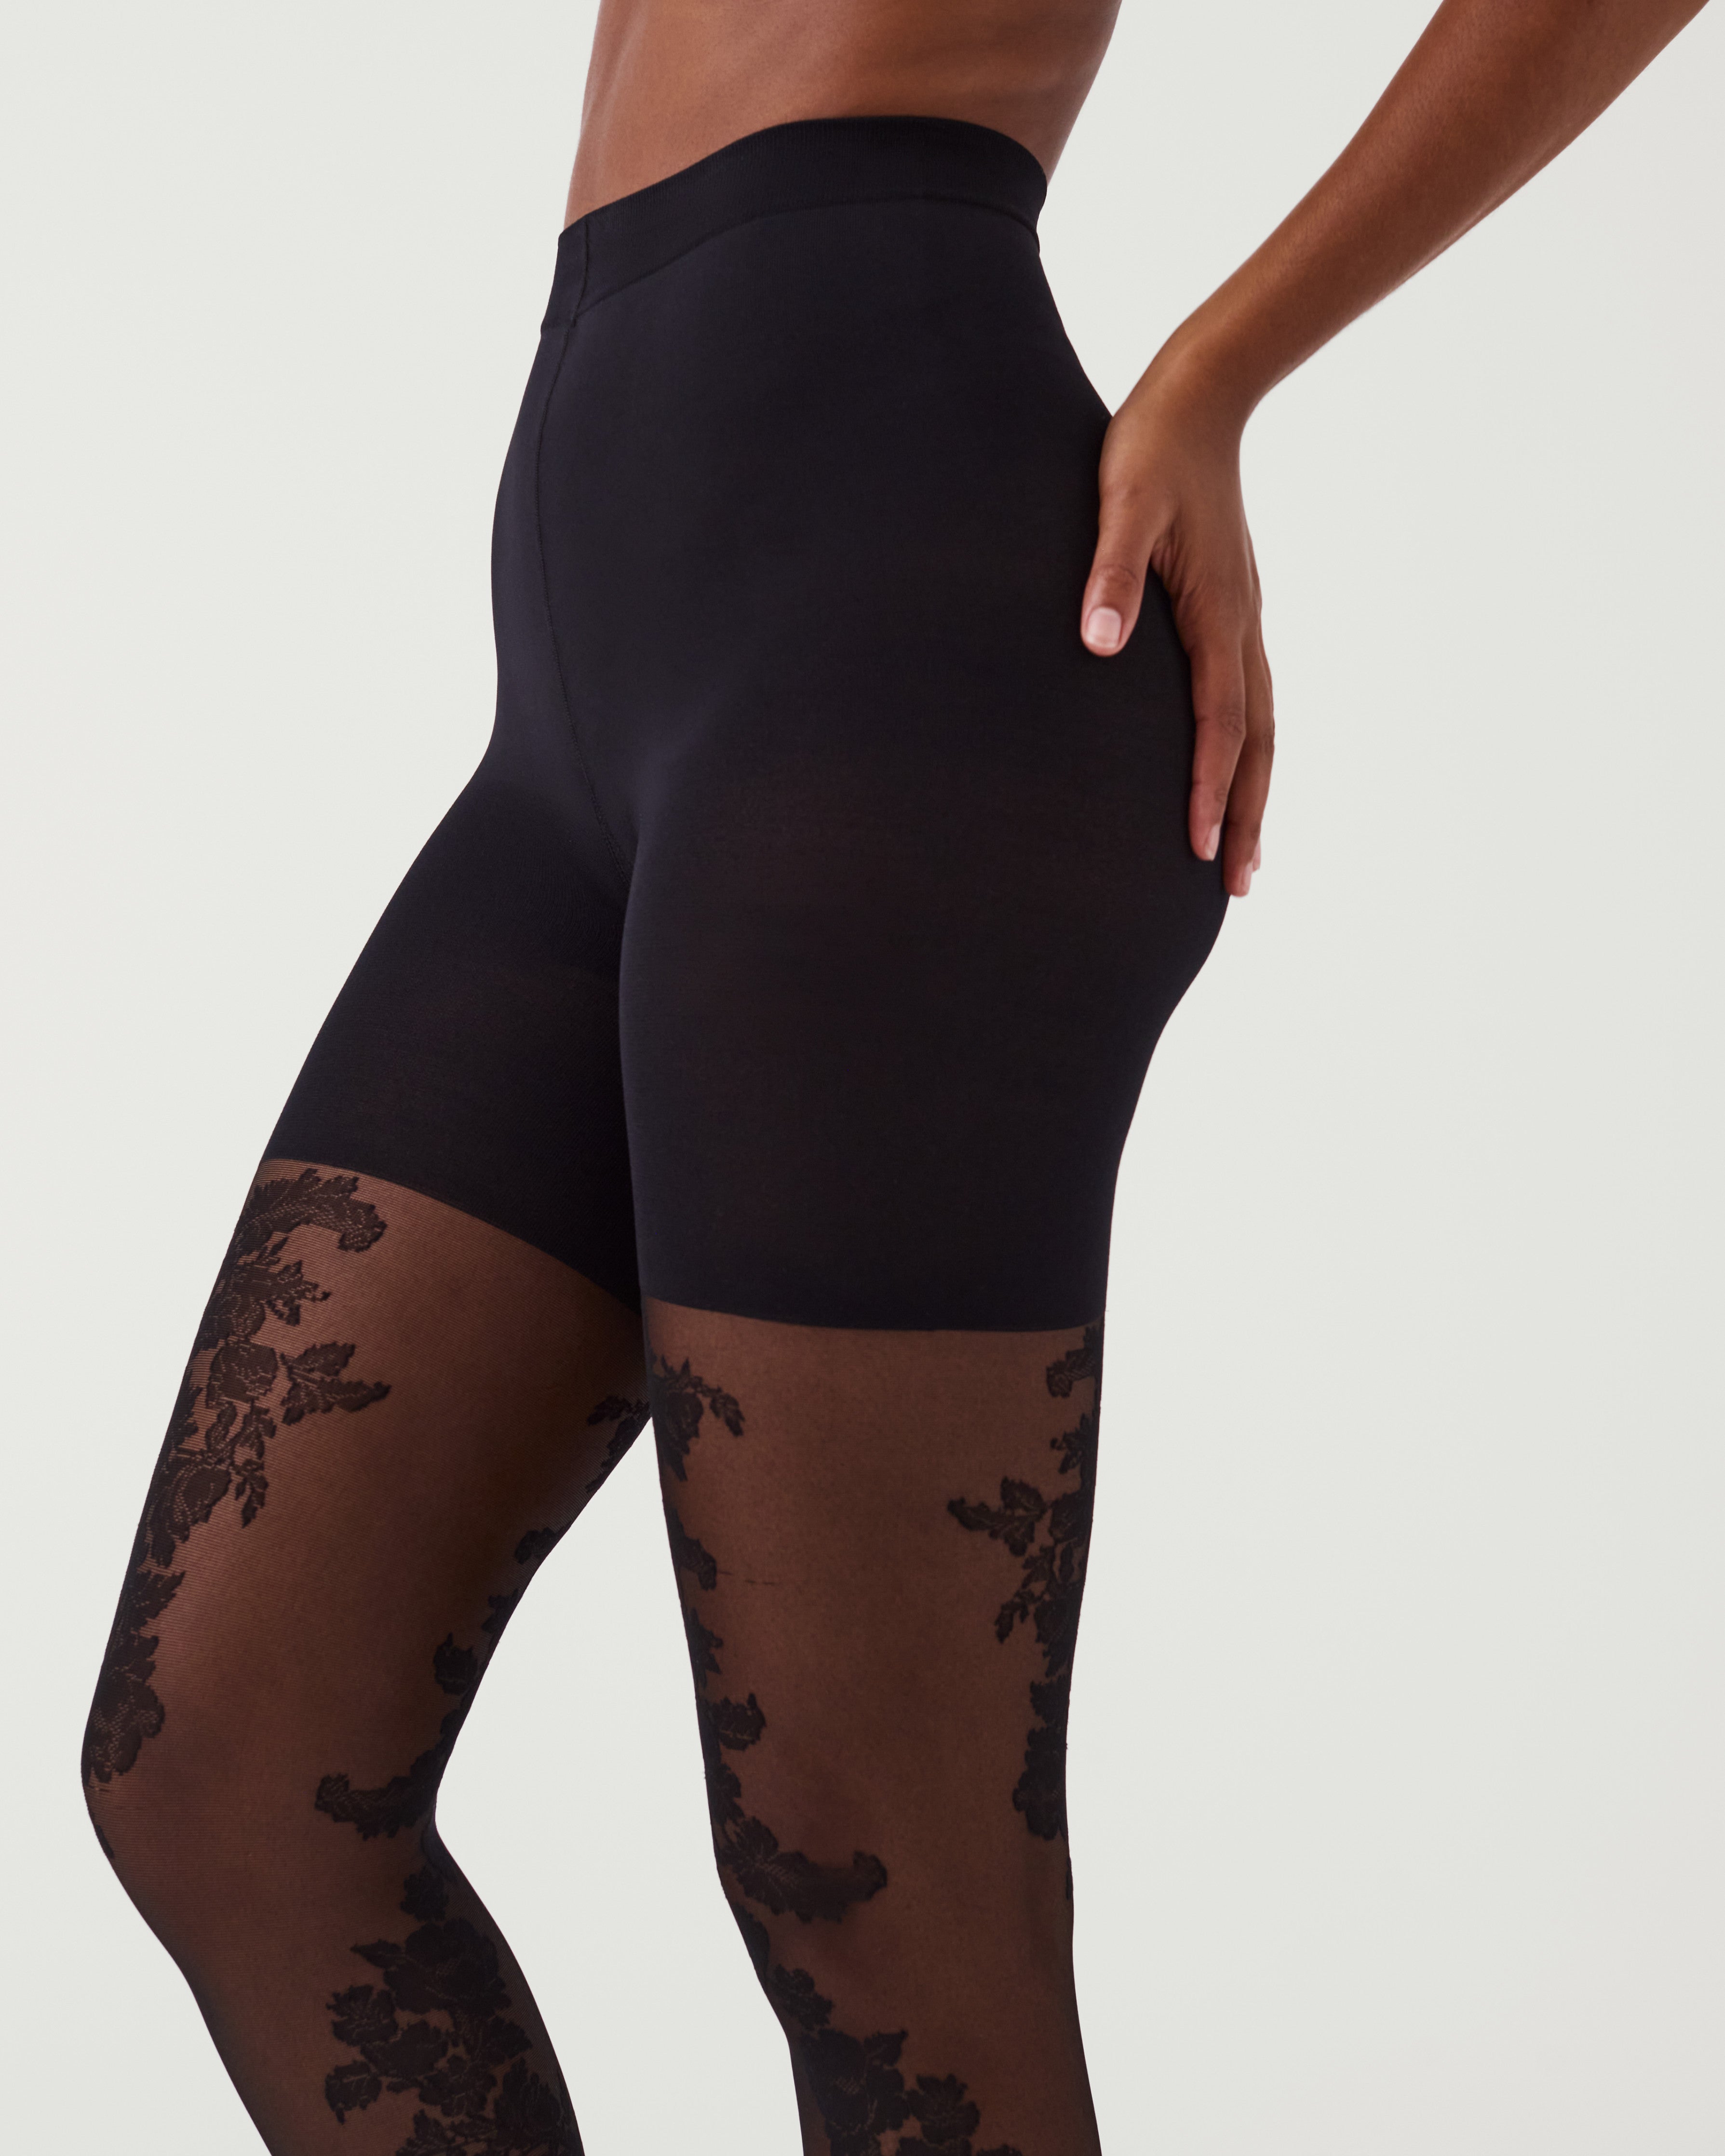 Spanx Patterned Tight End Tights Stunning Roses, $32, SPANX